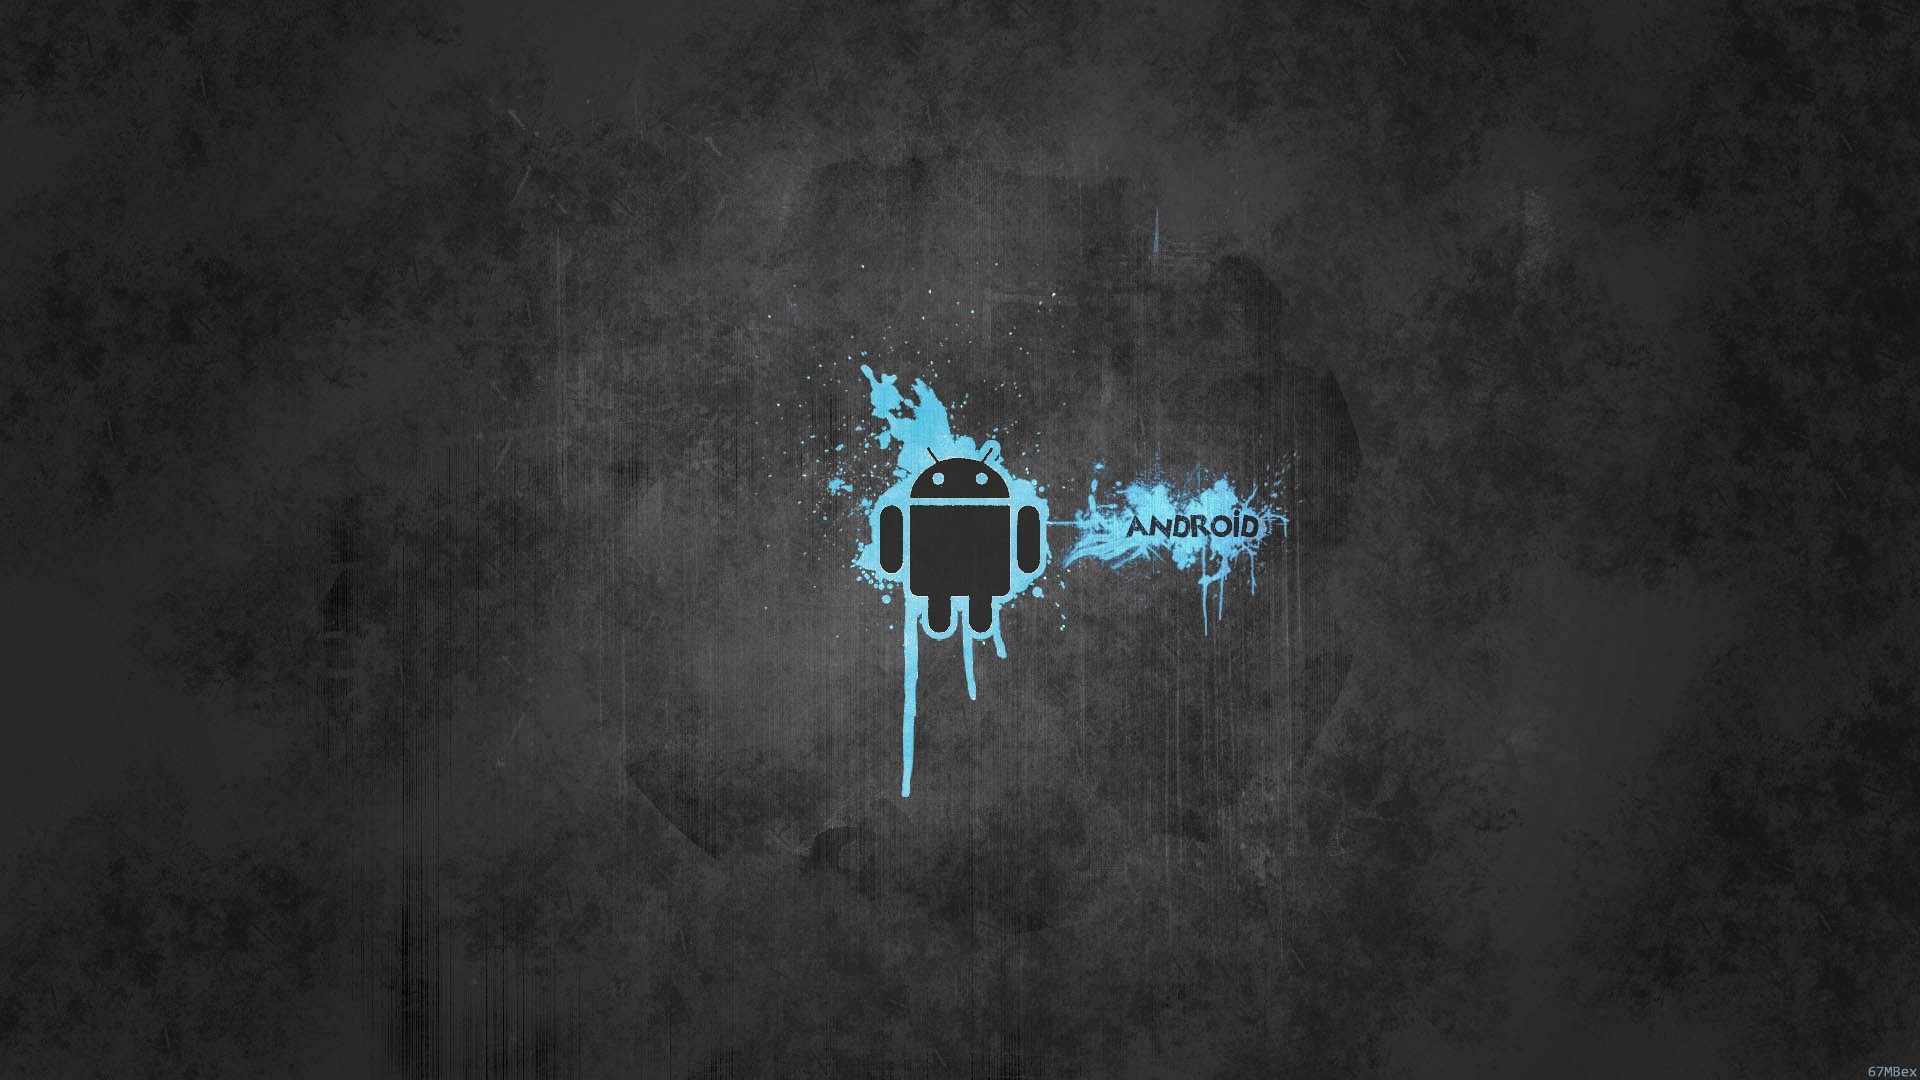 1920x1080 Wallpaper gray and blue android